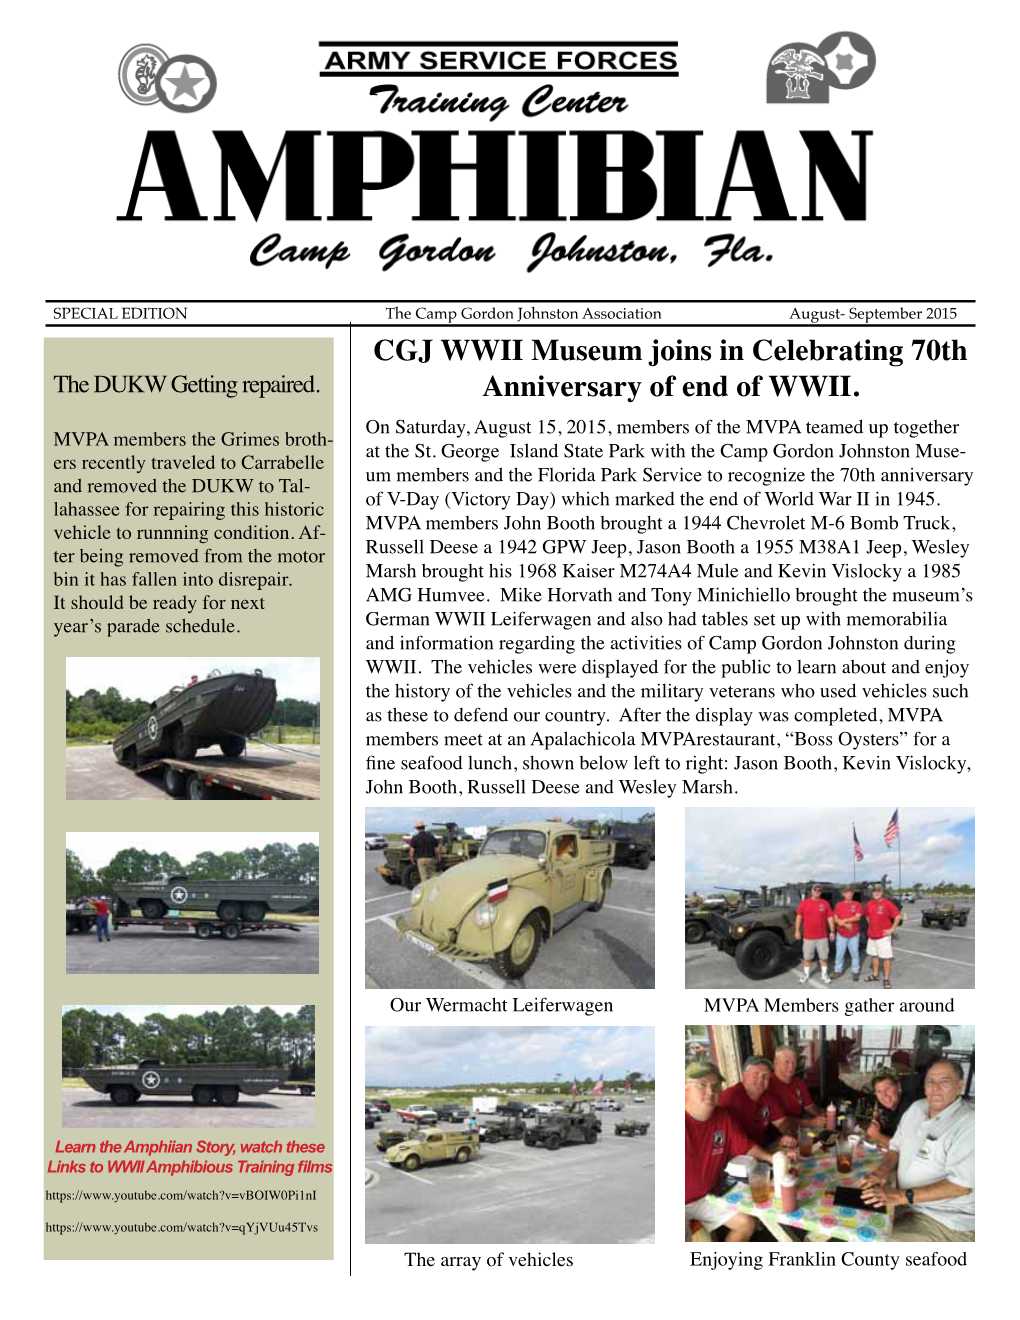 CGJ WWII Museum Joins in Celebrating 70Th Anniversary of End of WWII